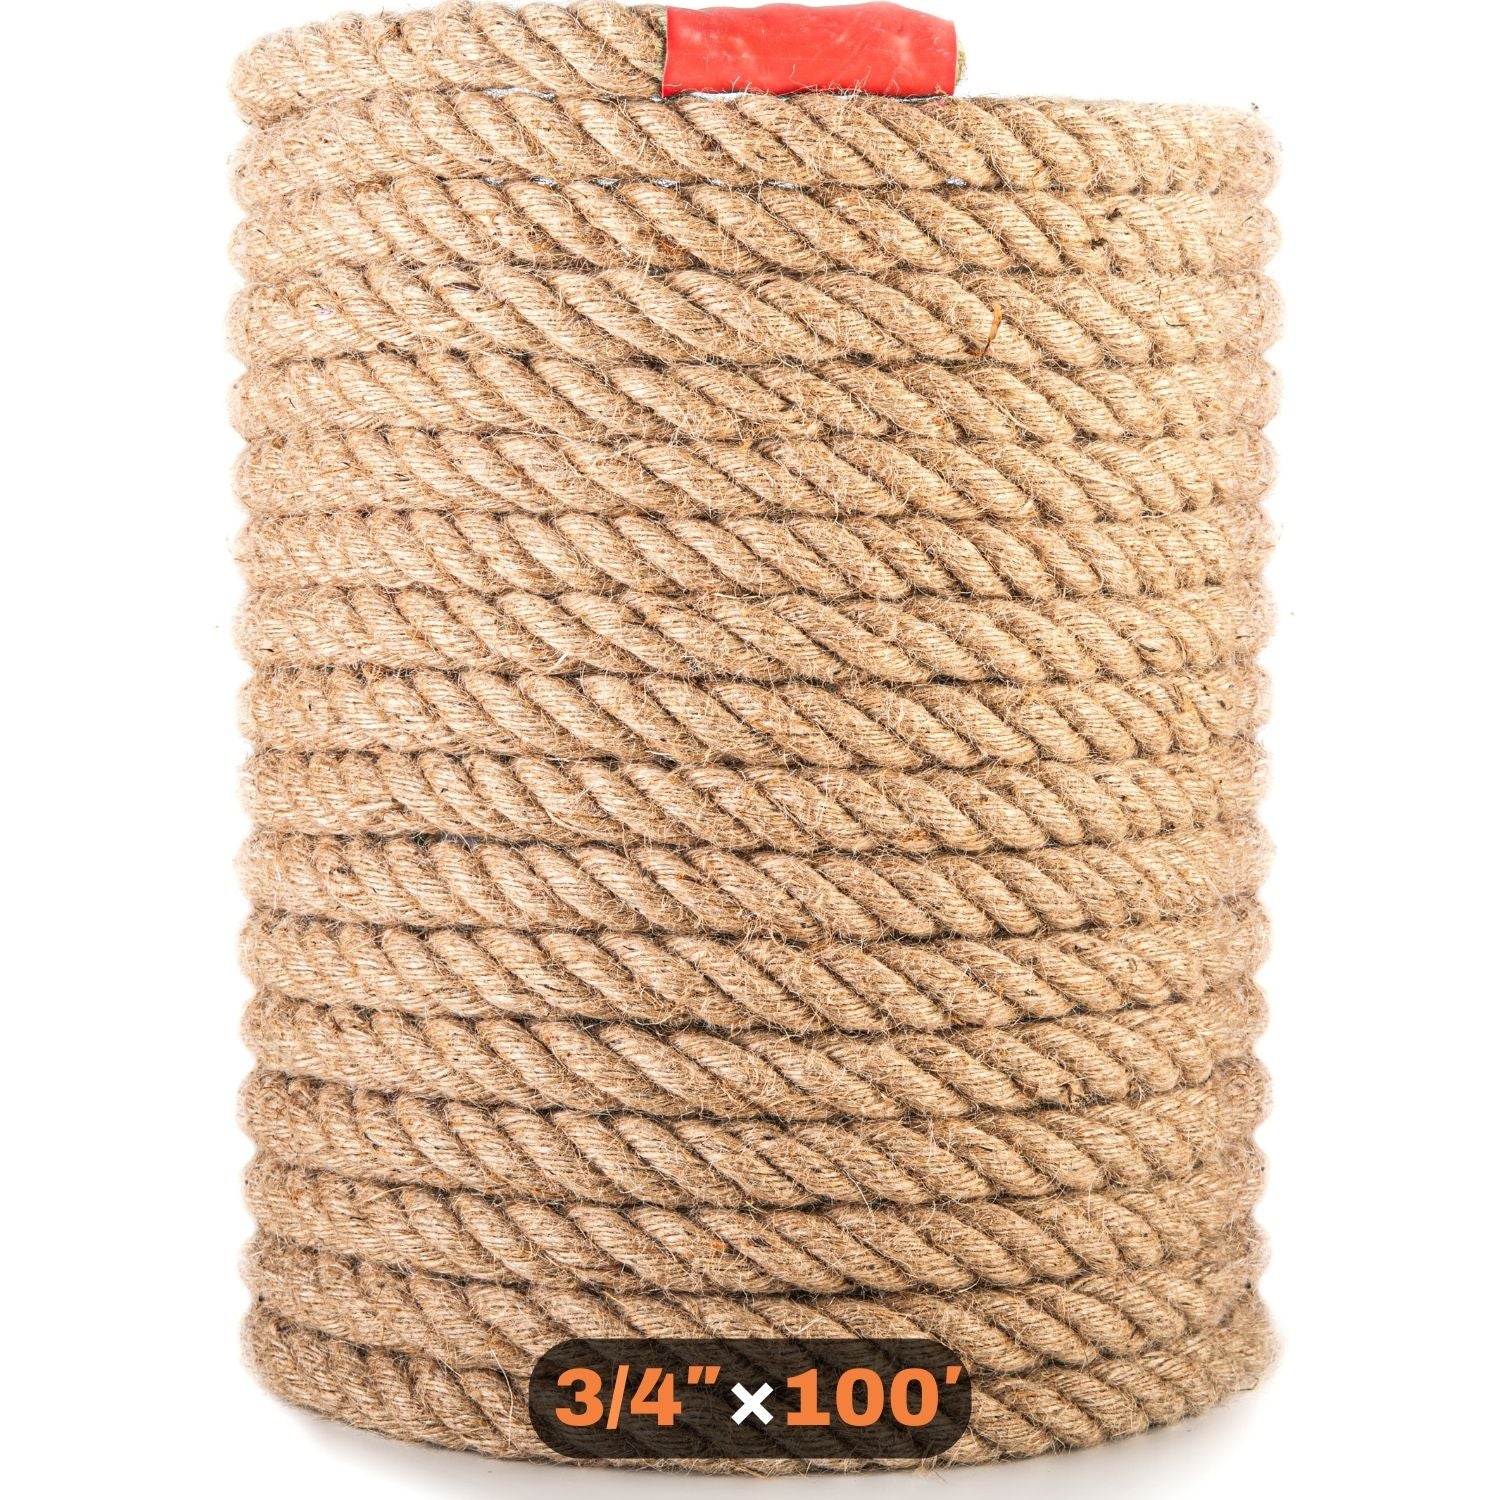 Natural Jute Rope - 3/4 Inch×25 Feet - Twisted Manila Rope - Thick Hemp Rope for Crafts, Hammock, Nautical, Decorating